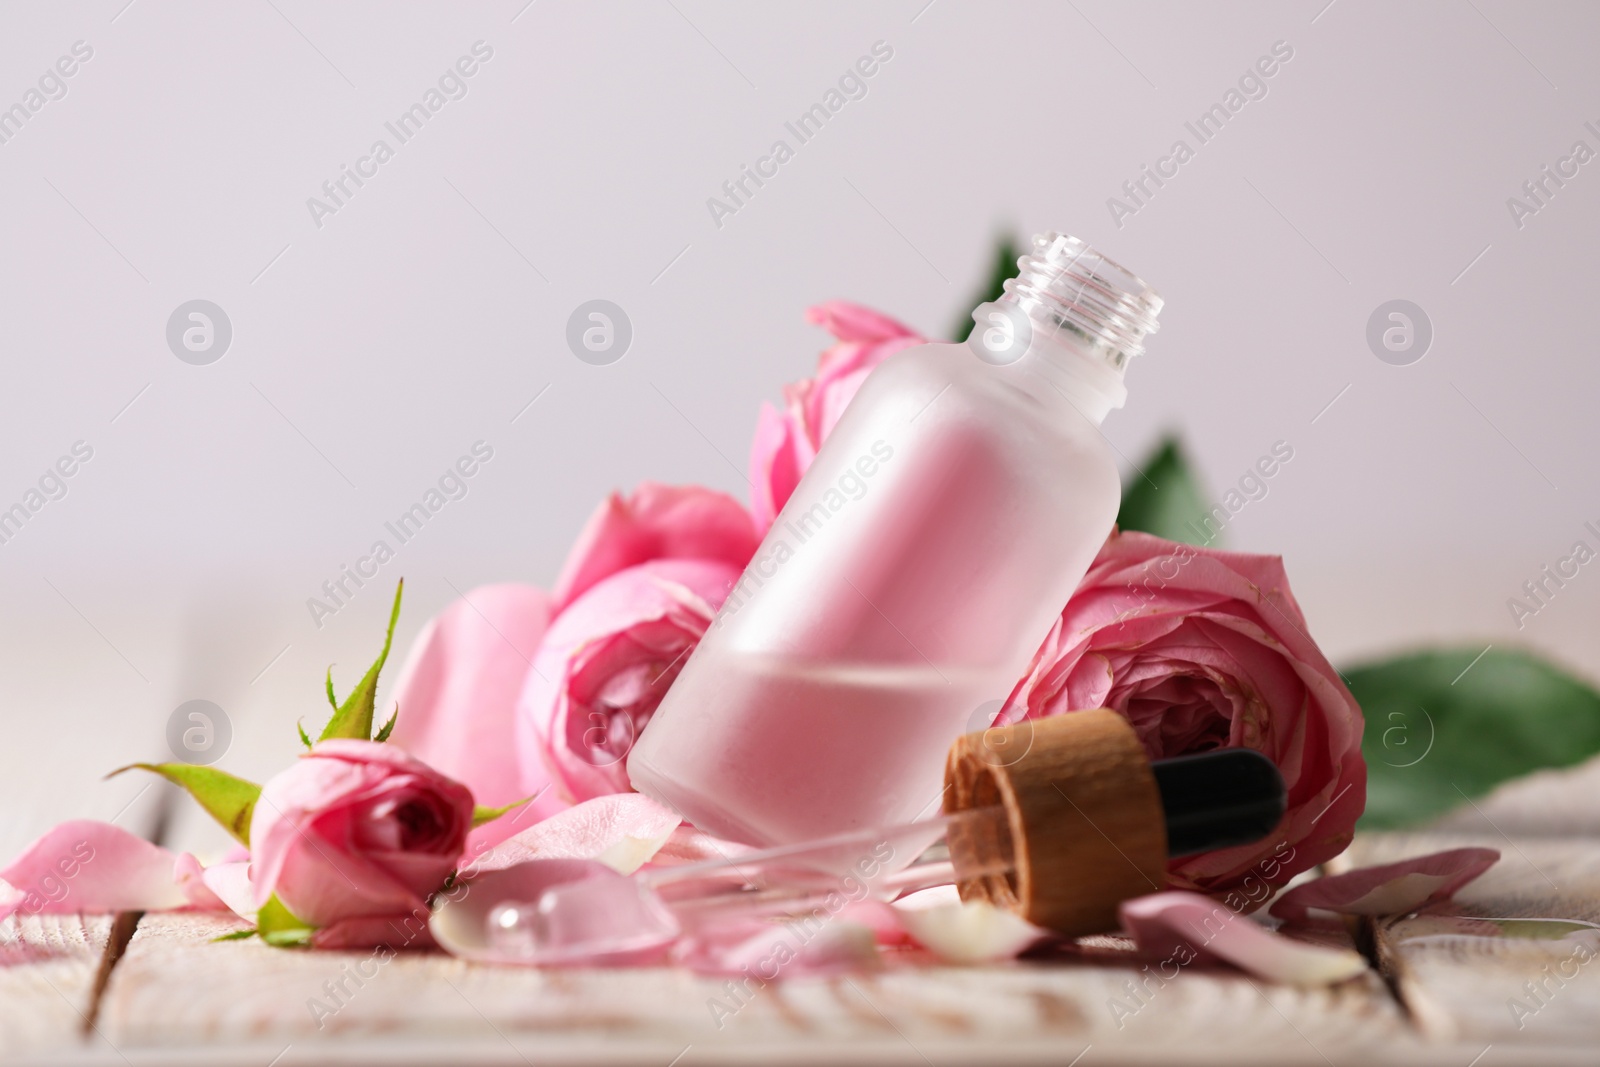 Photo of Bottle of essential oil and roses on white wooden table against light background